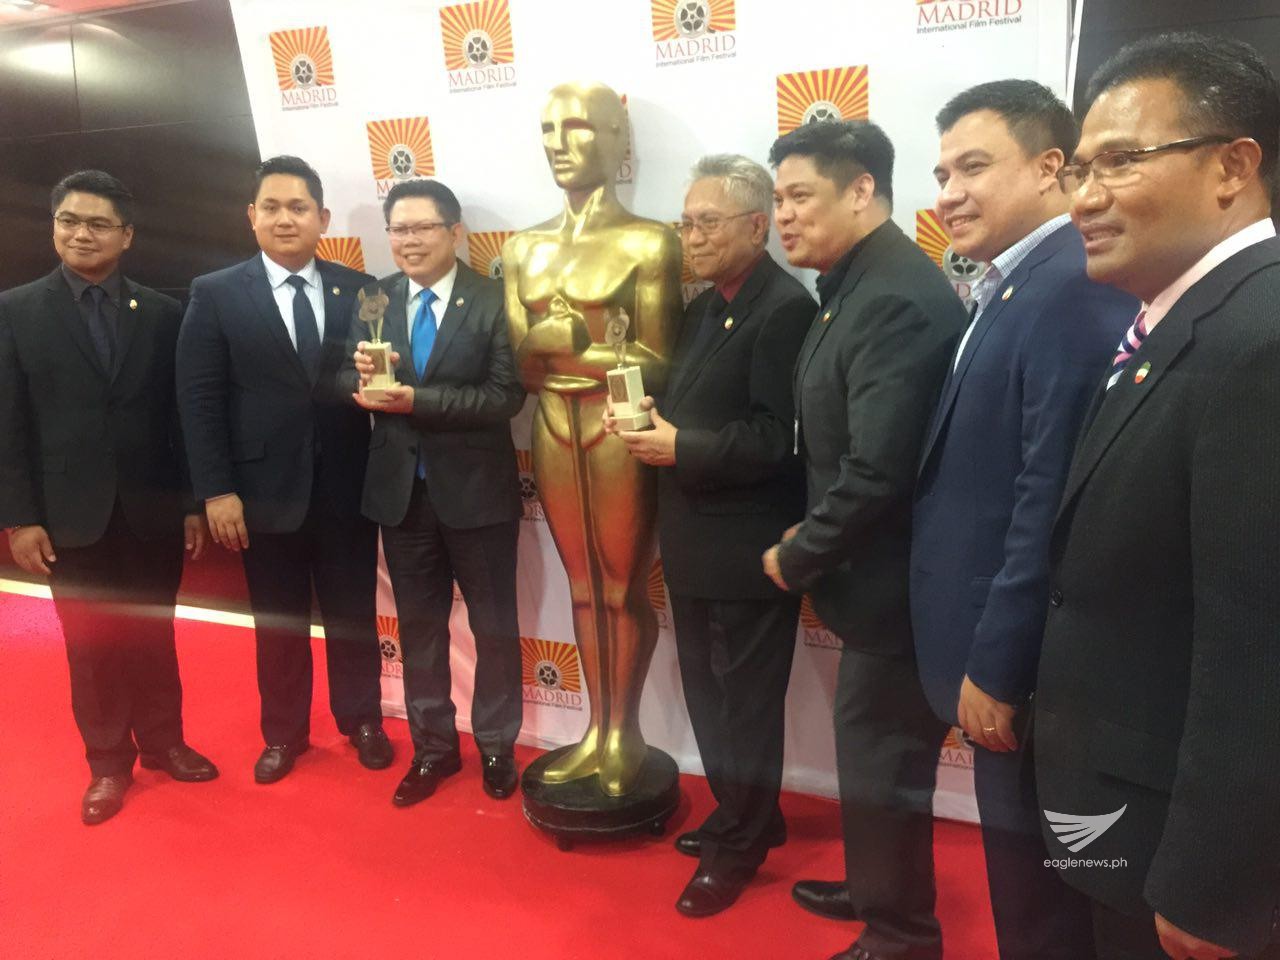 Some of the Iglesia Ni Cristo ministers based in Europe, pose for a photo, carrying the two trophies won by "Walang Take Two" during the awards night of of the Madrid International Film Festival on Saturday, July 9, 2016.